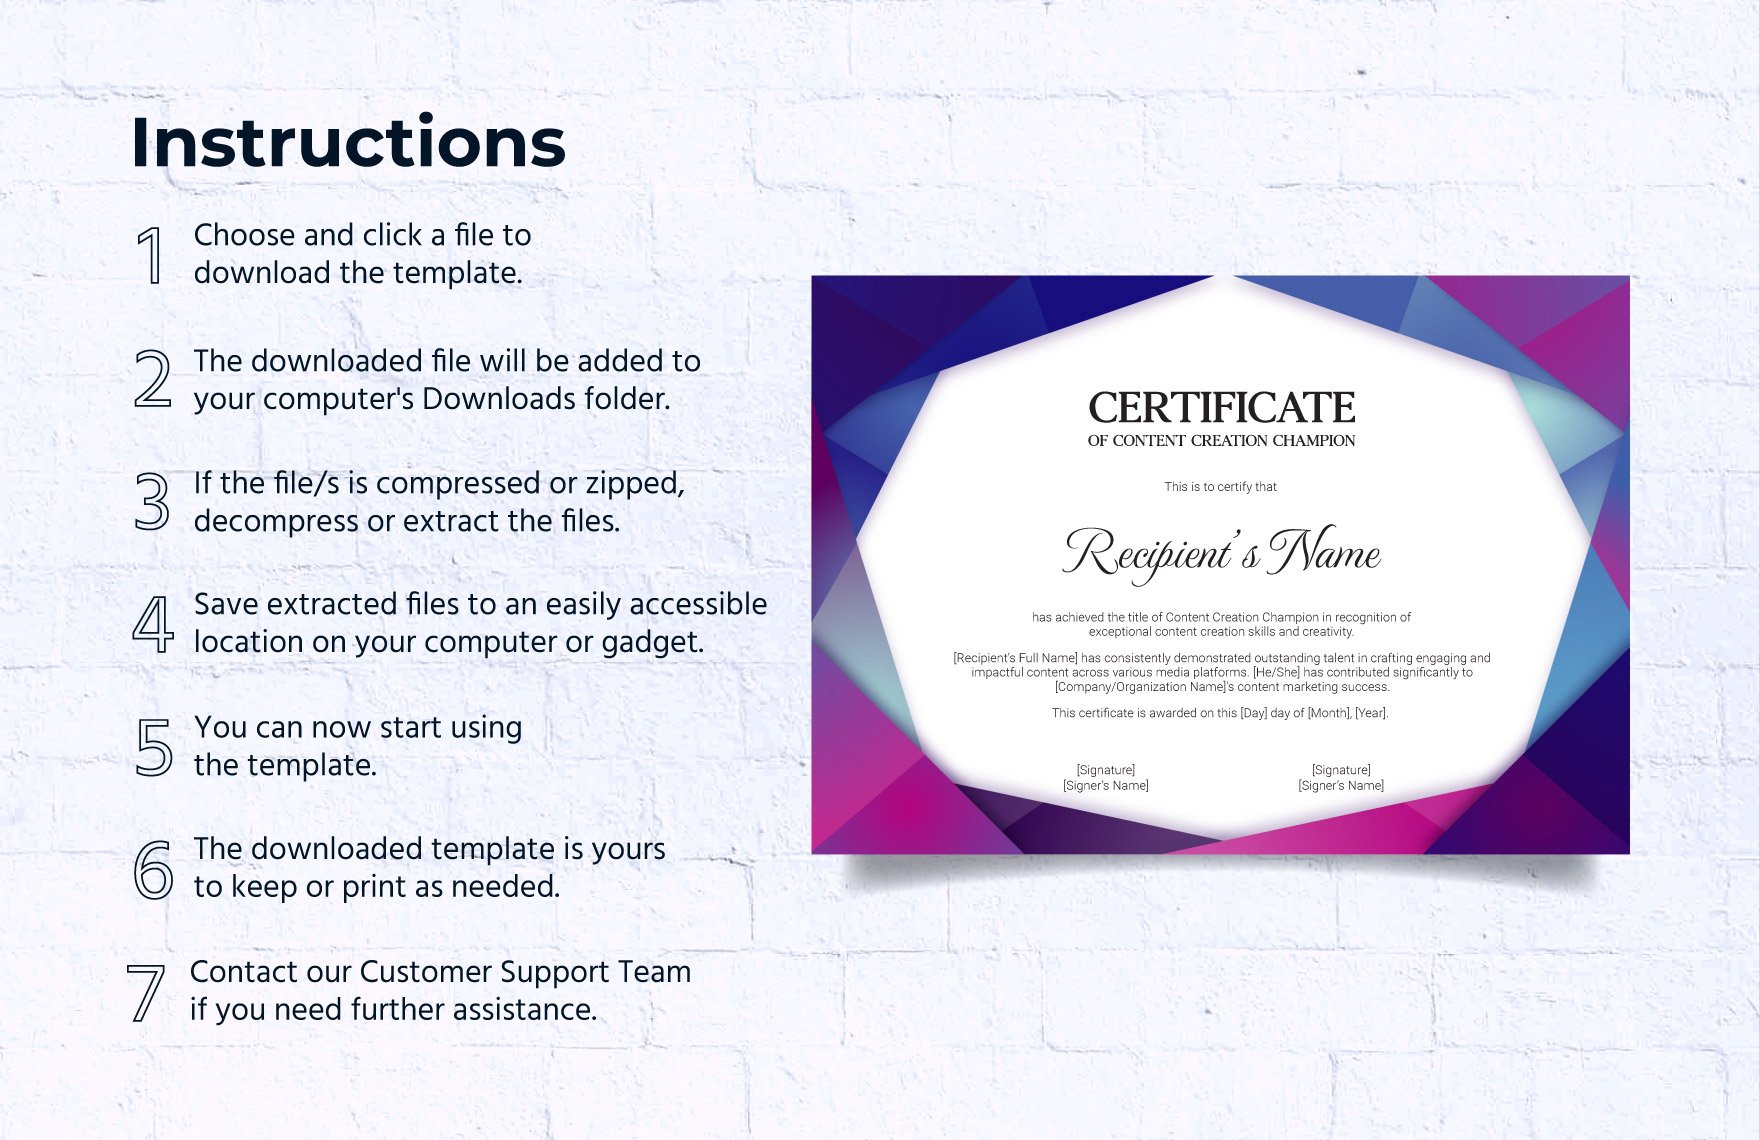 Content Creation Champion Certificate Template